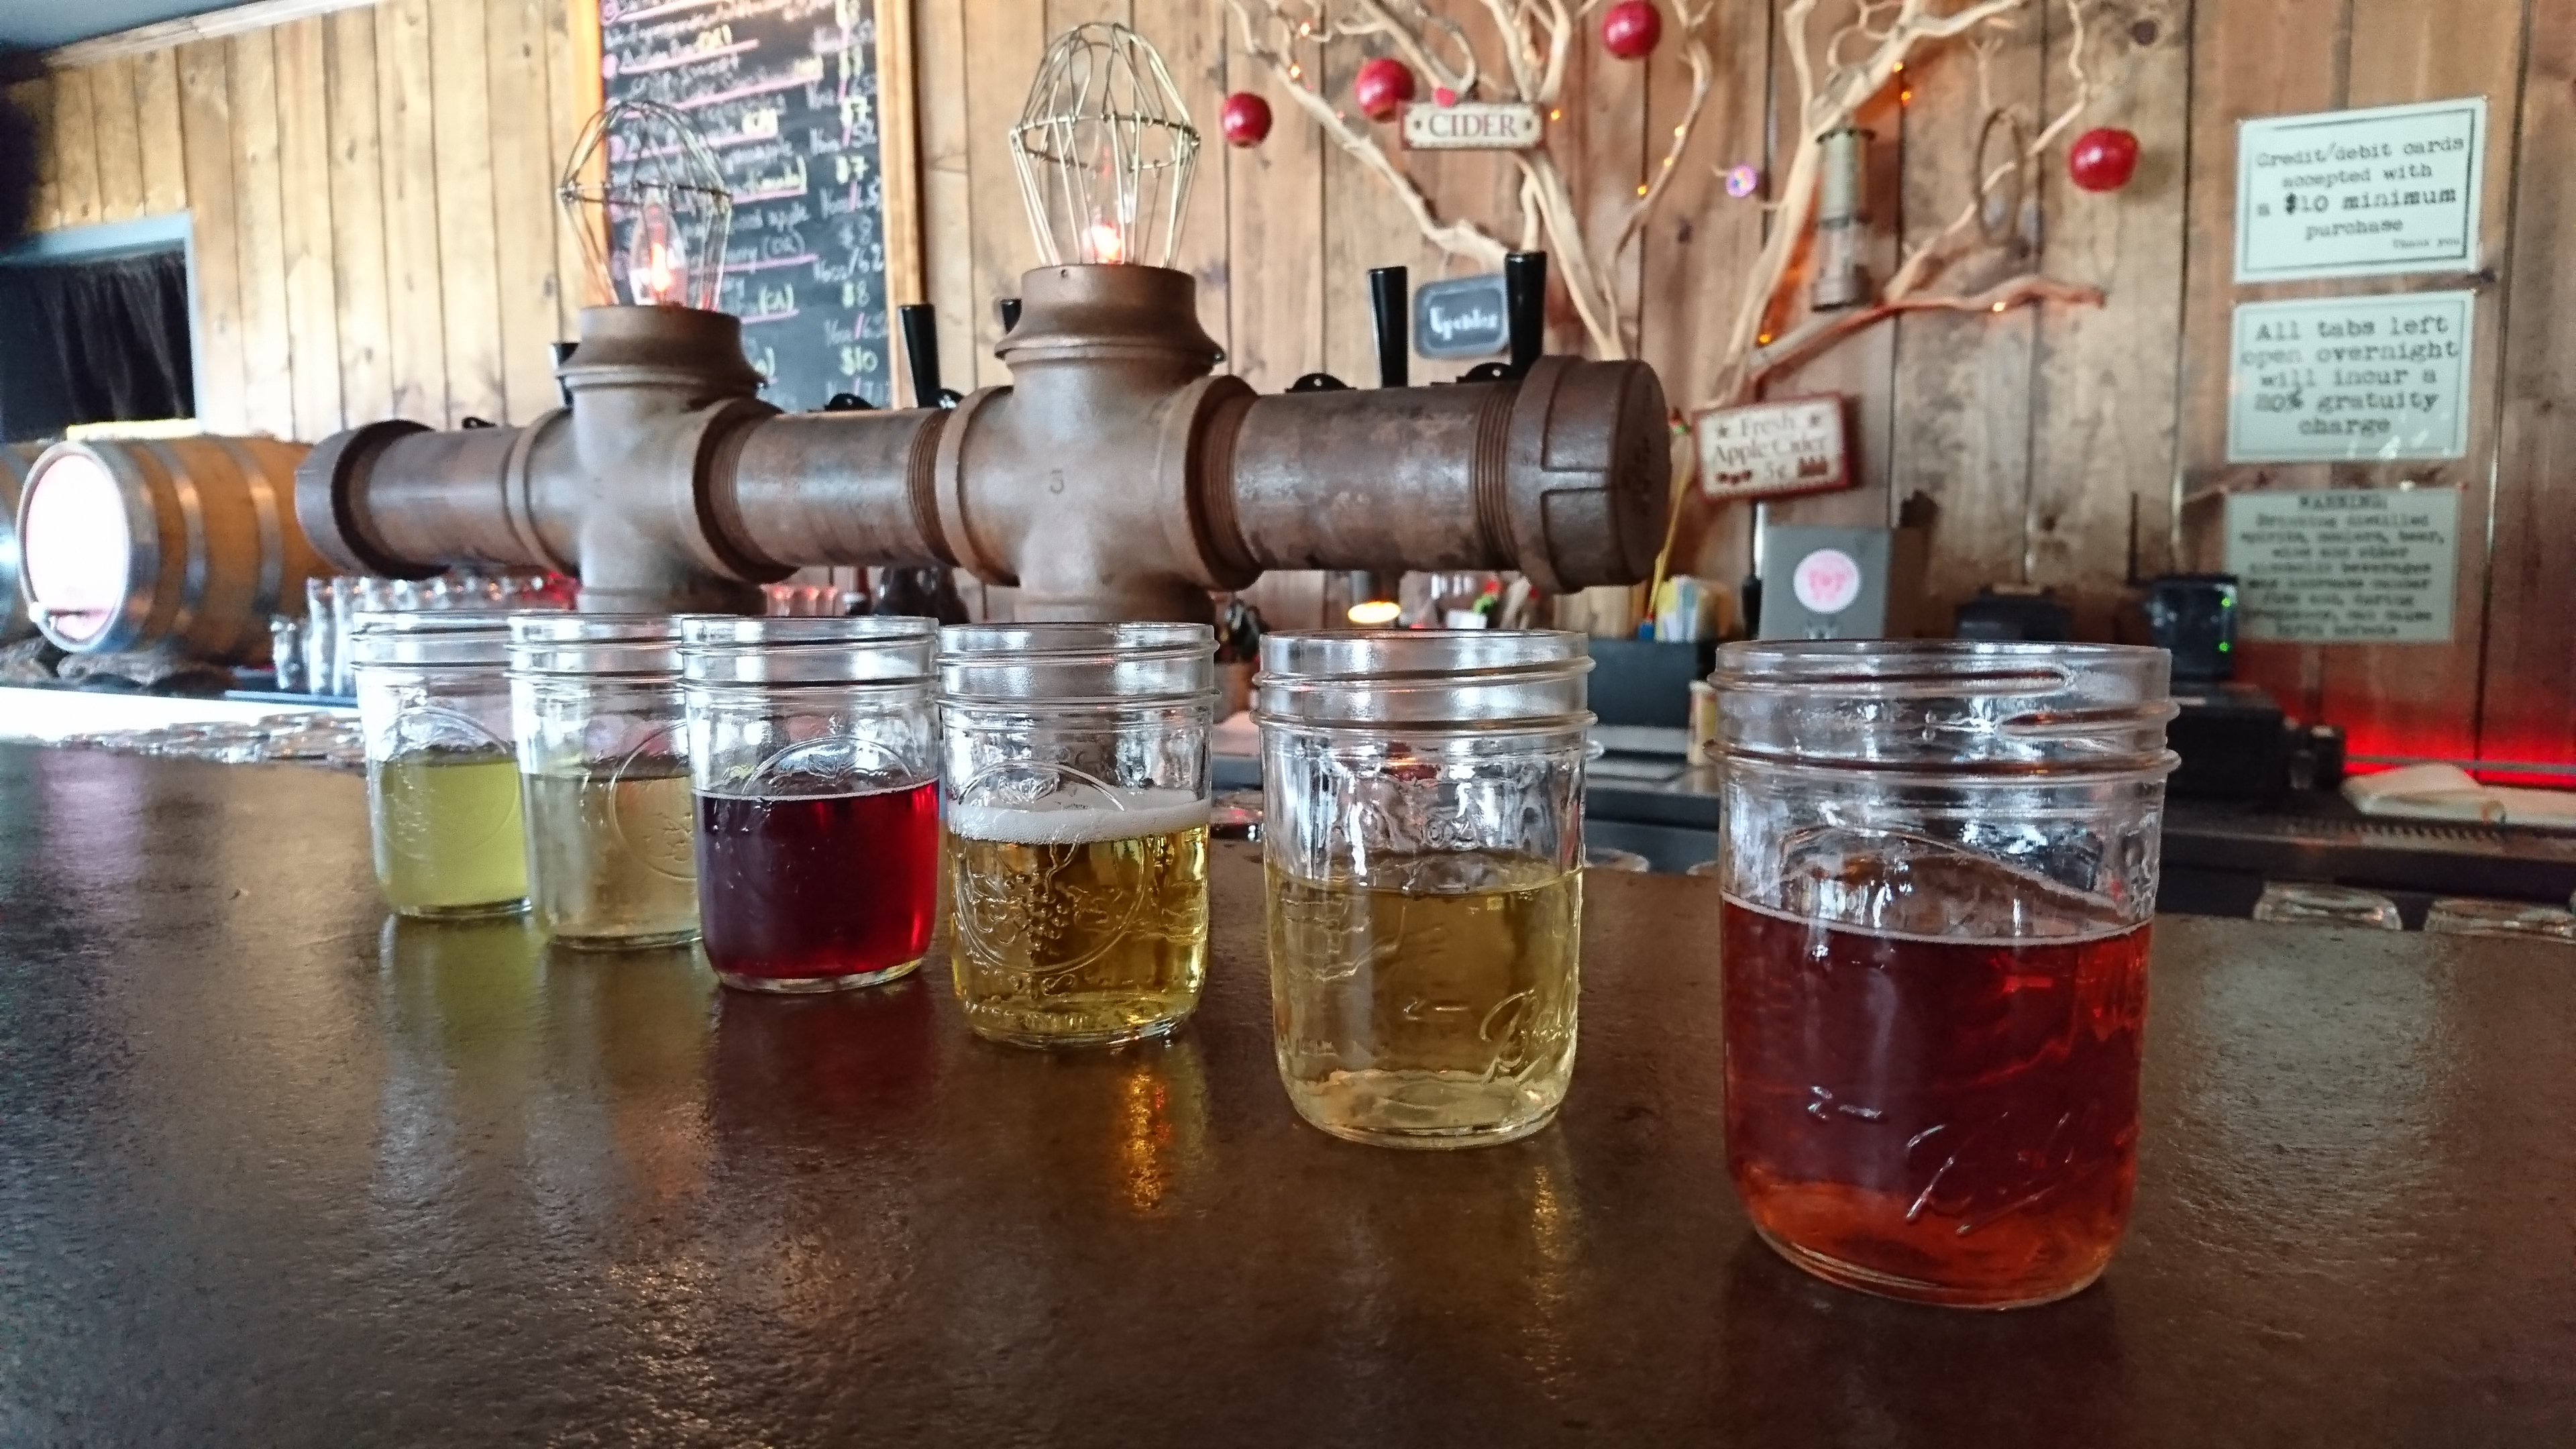 half full jars of red and yellow cider lined up on a copper colored bar with copper colored pipes behind the jars and bare branches pinned to the wall with apples hanging from the branches.